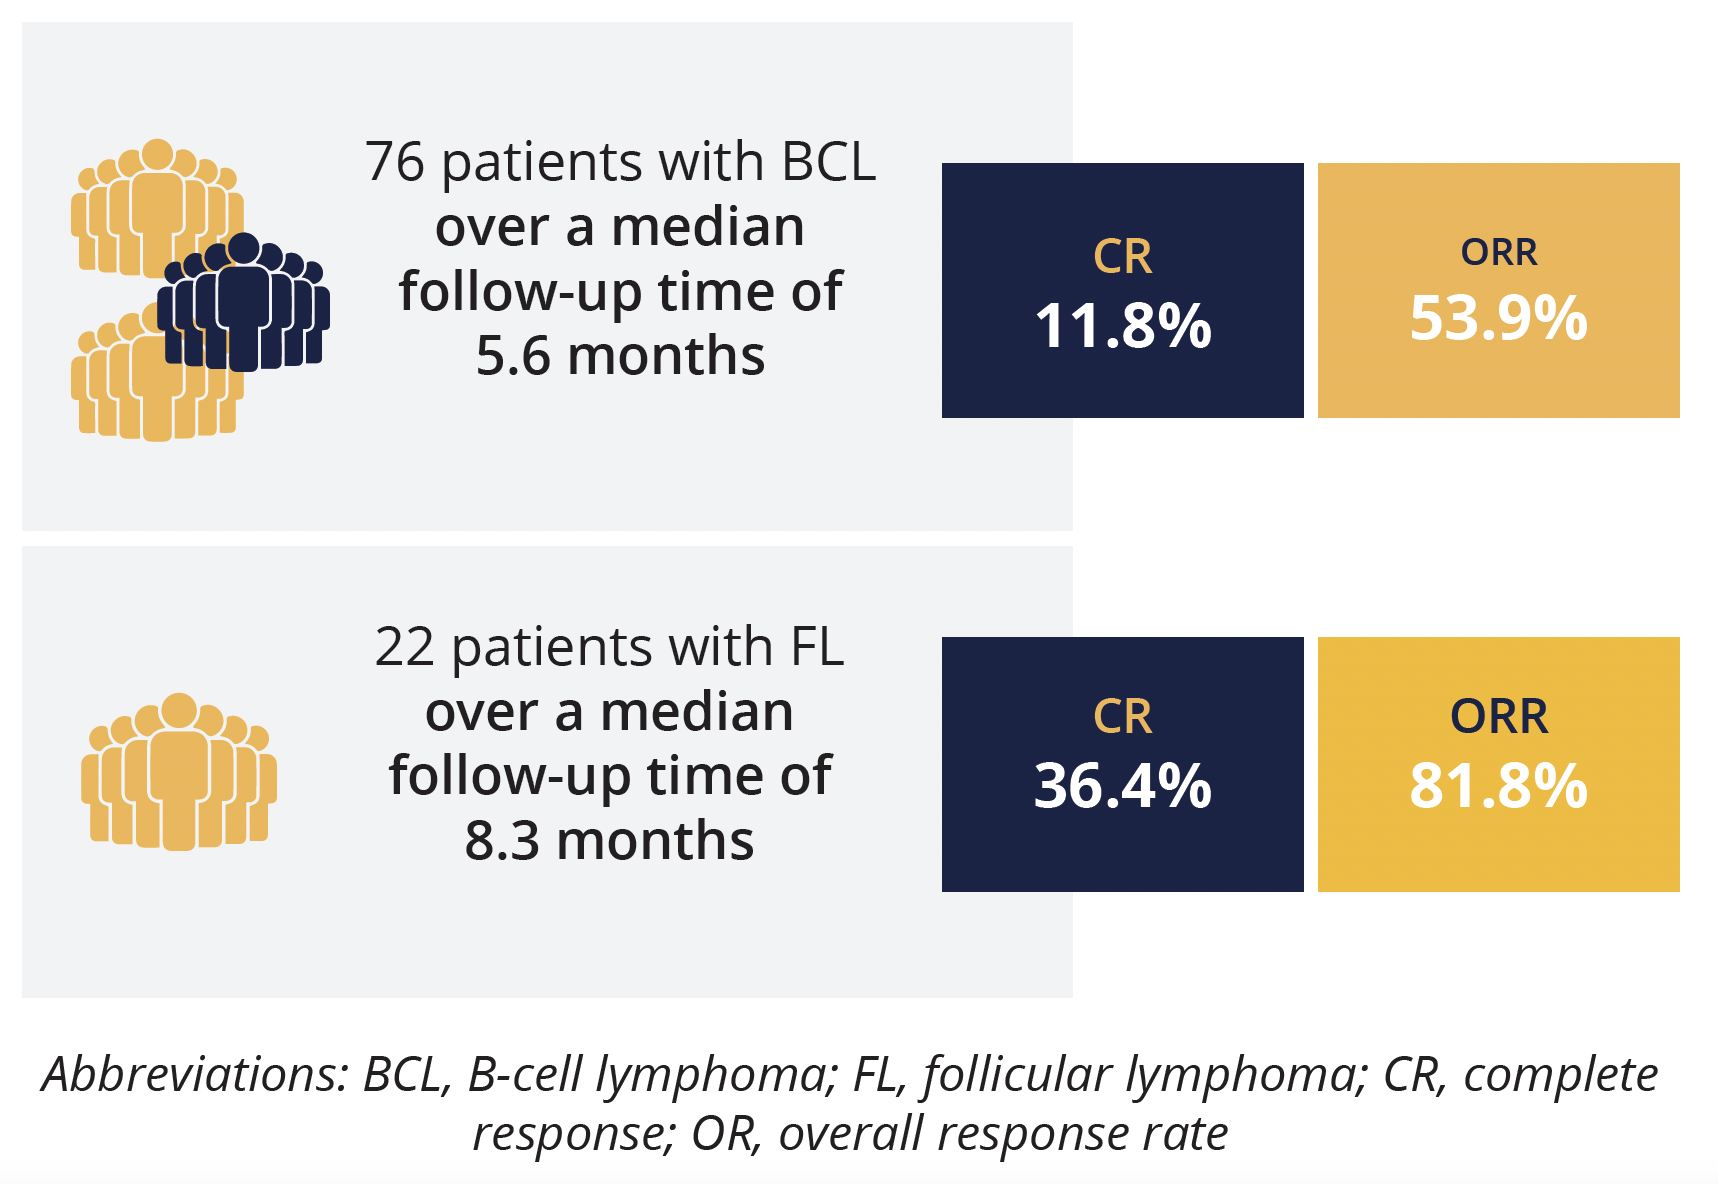 Promising response rates with HMPL-689 In B-cell lymphoma patients, particularly those with follicular lymphoma